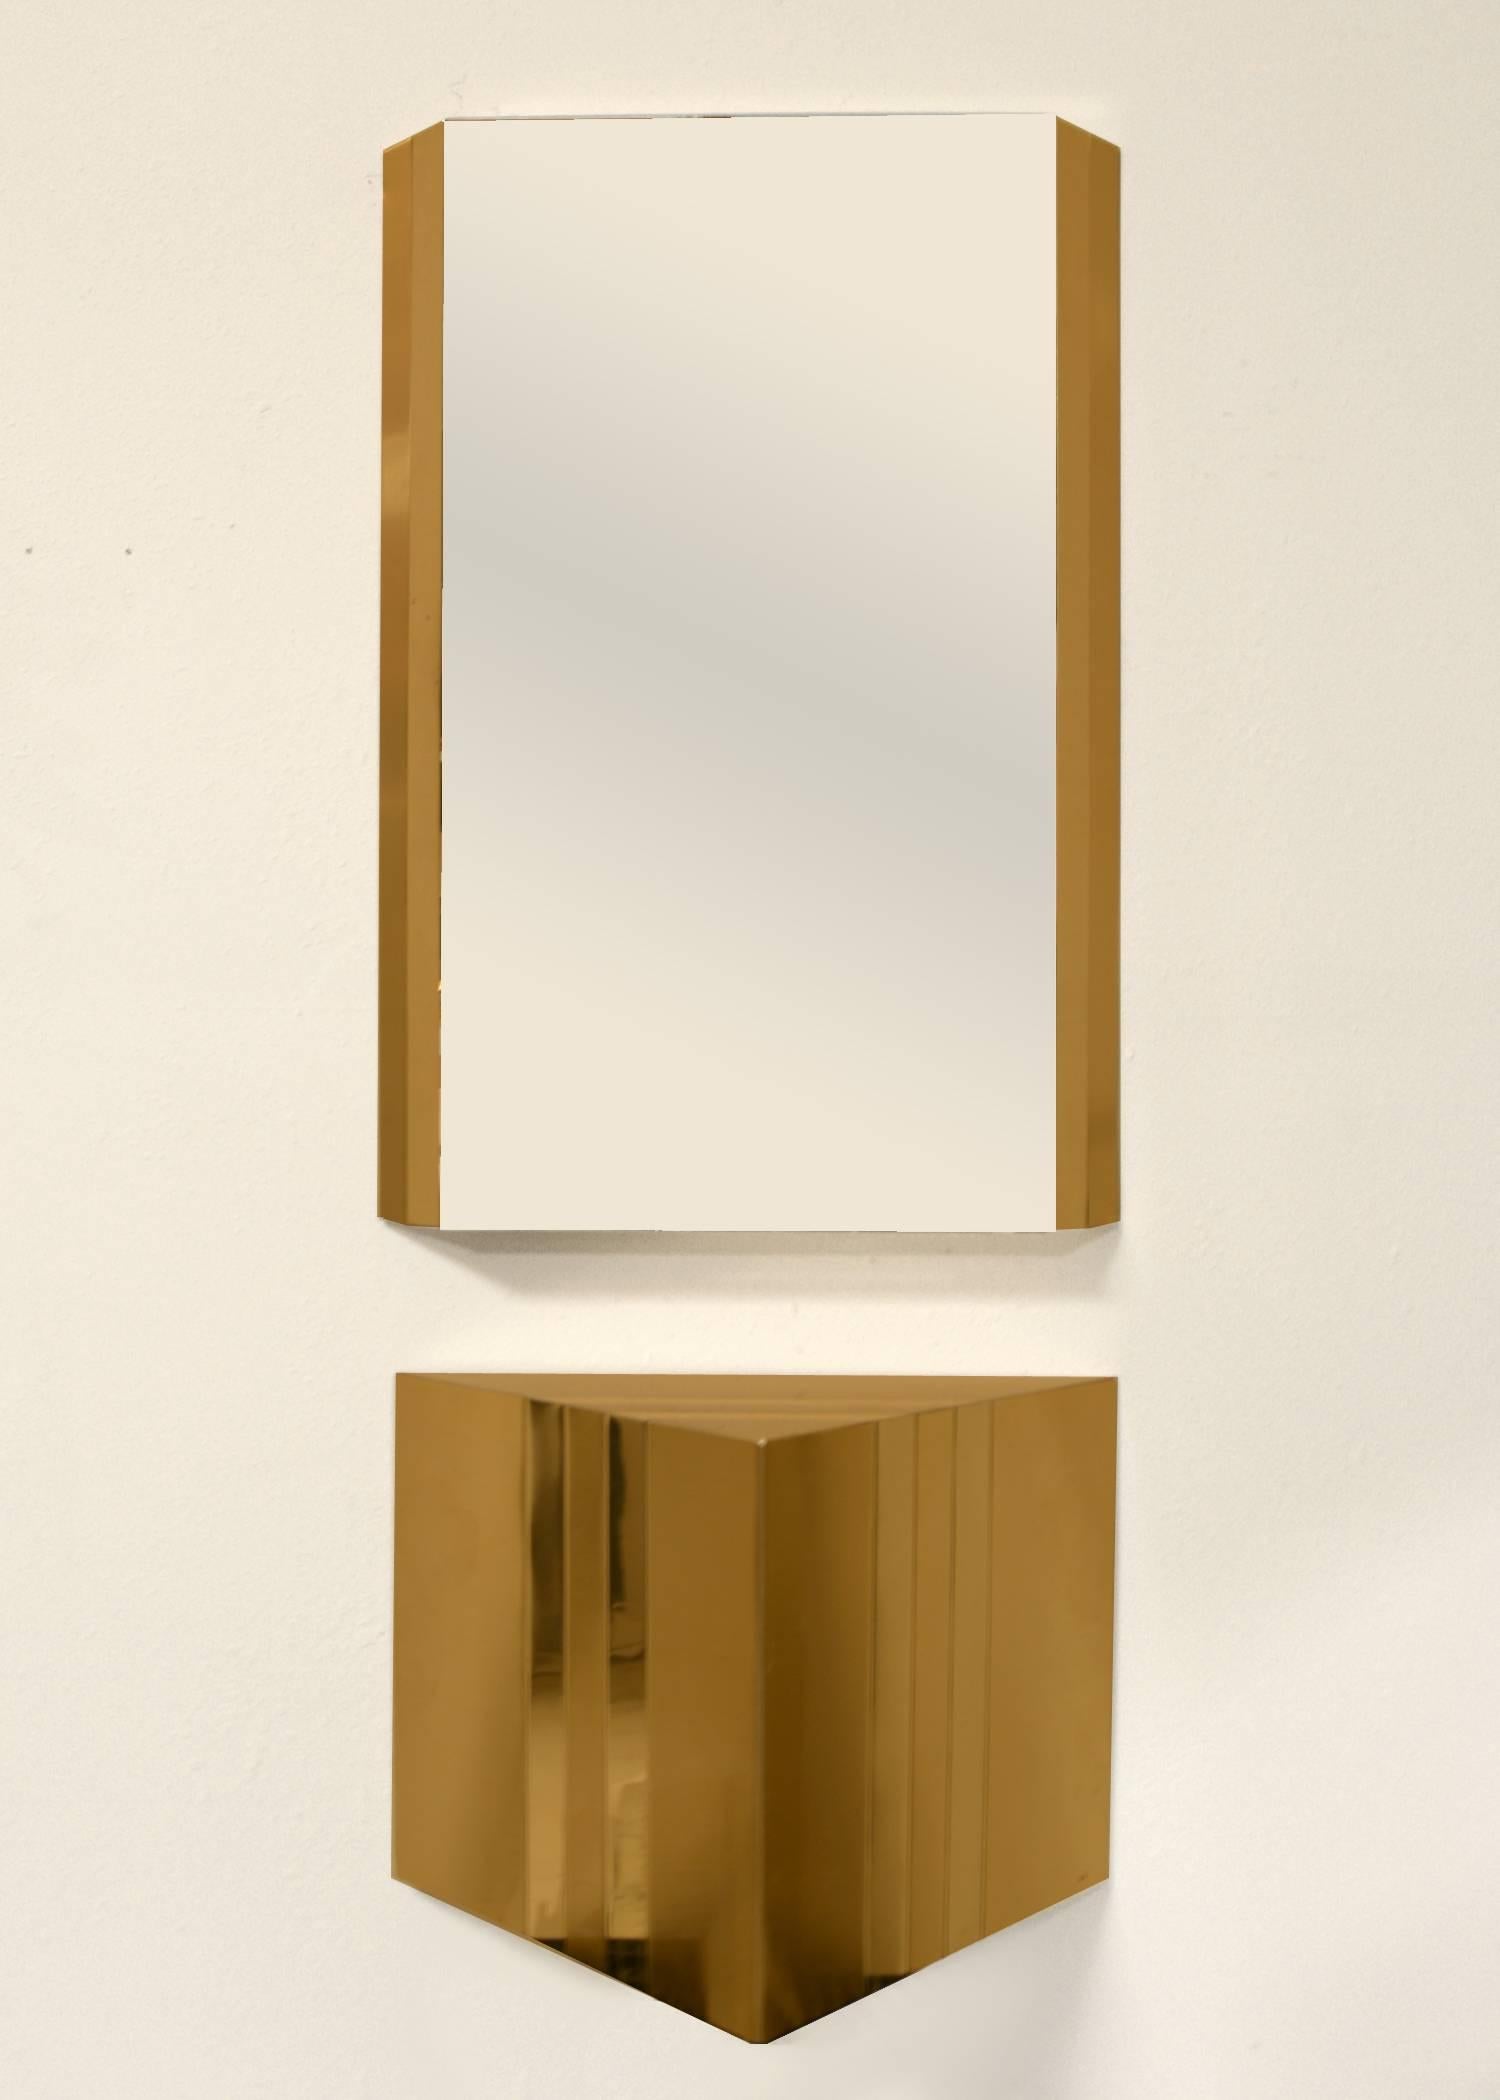 Two tone brass wall hung consoles with matching mirrors. Sold as a set of one console and one mirror. Two sets available. 
Mirror  36” H  x  24” W  x  3” D
Console 17” H  x 23.5 ” W  x  12” D